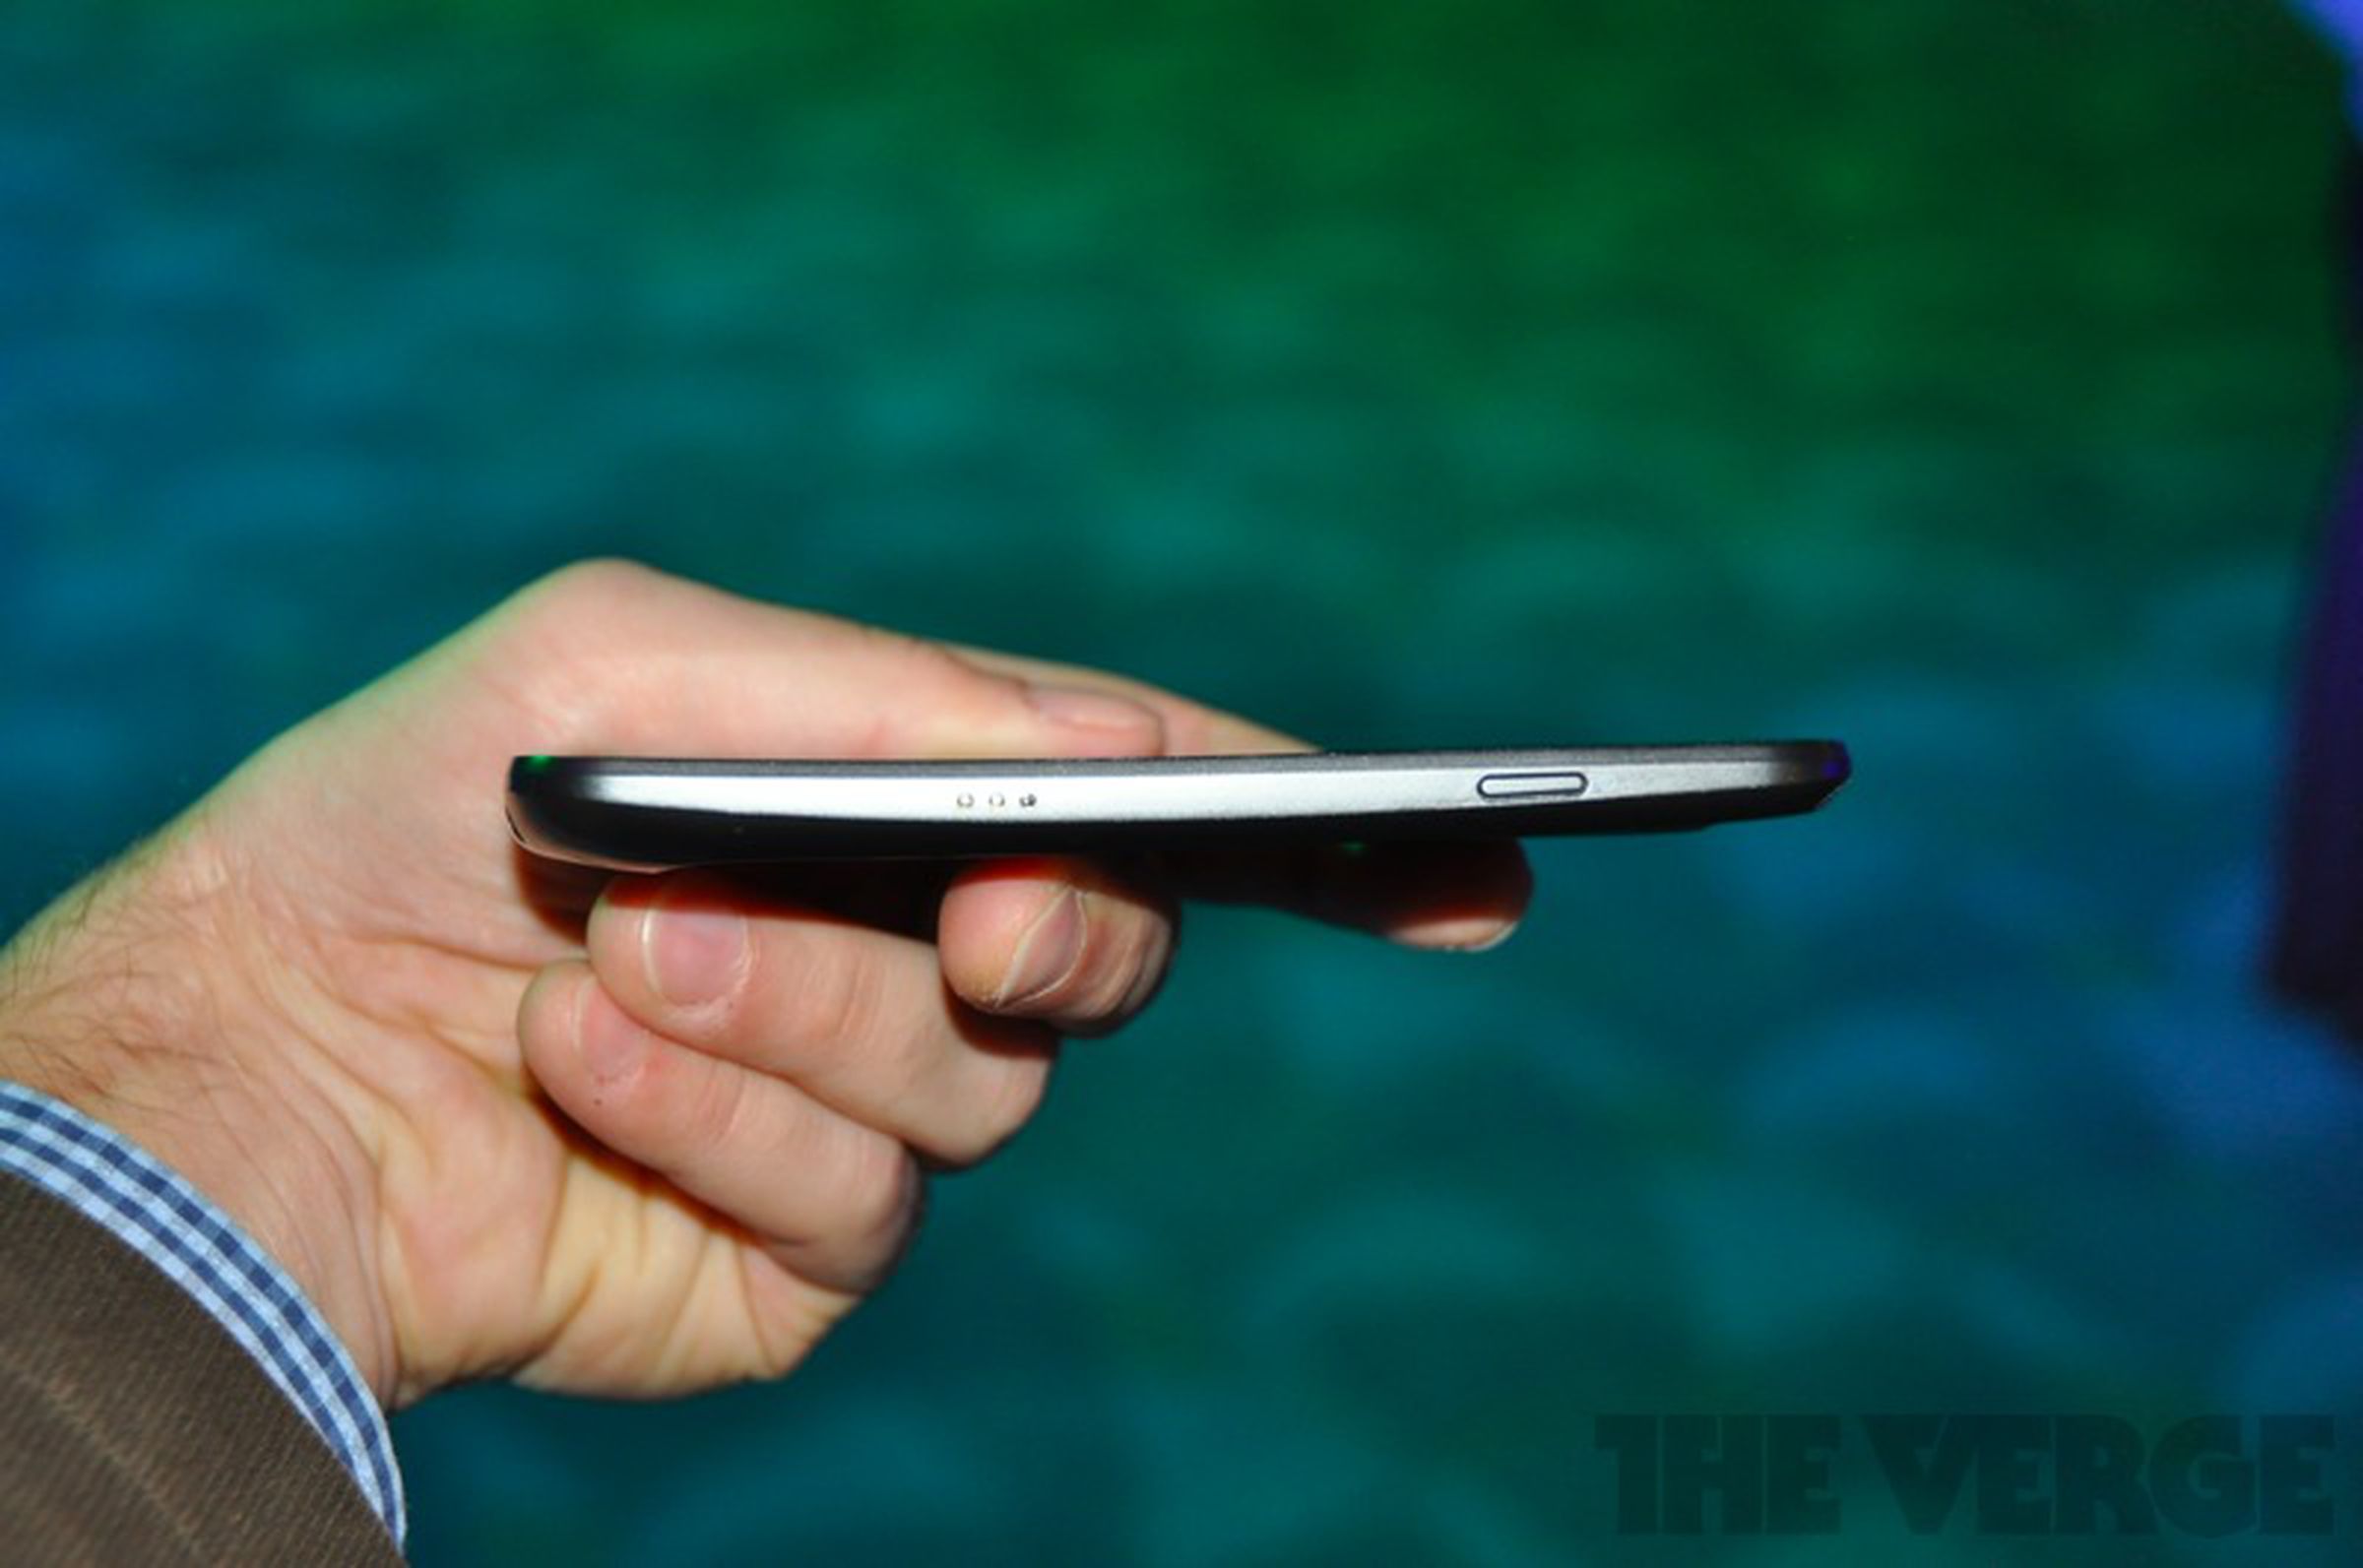 Galaxy Nexus with Ice Cream Sandwich: pictures, video, and hands-on